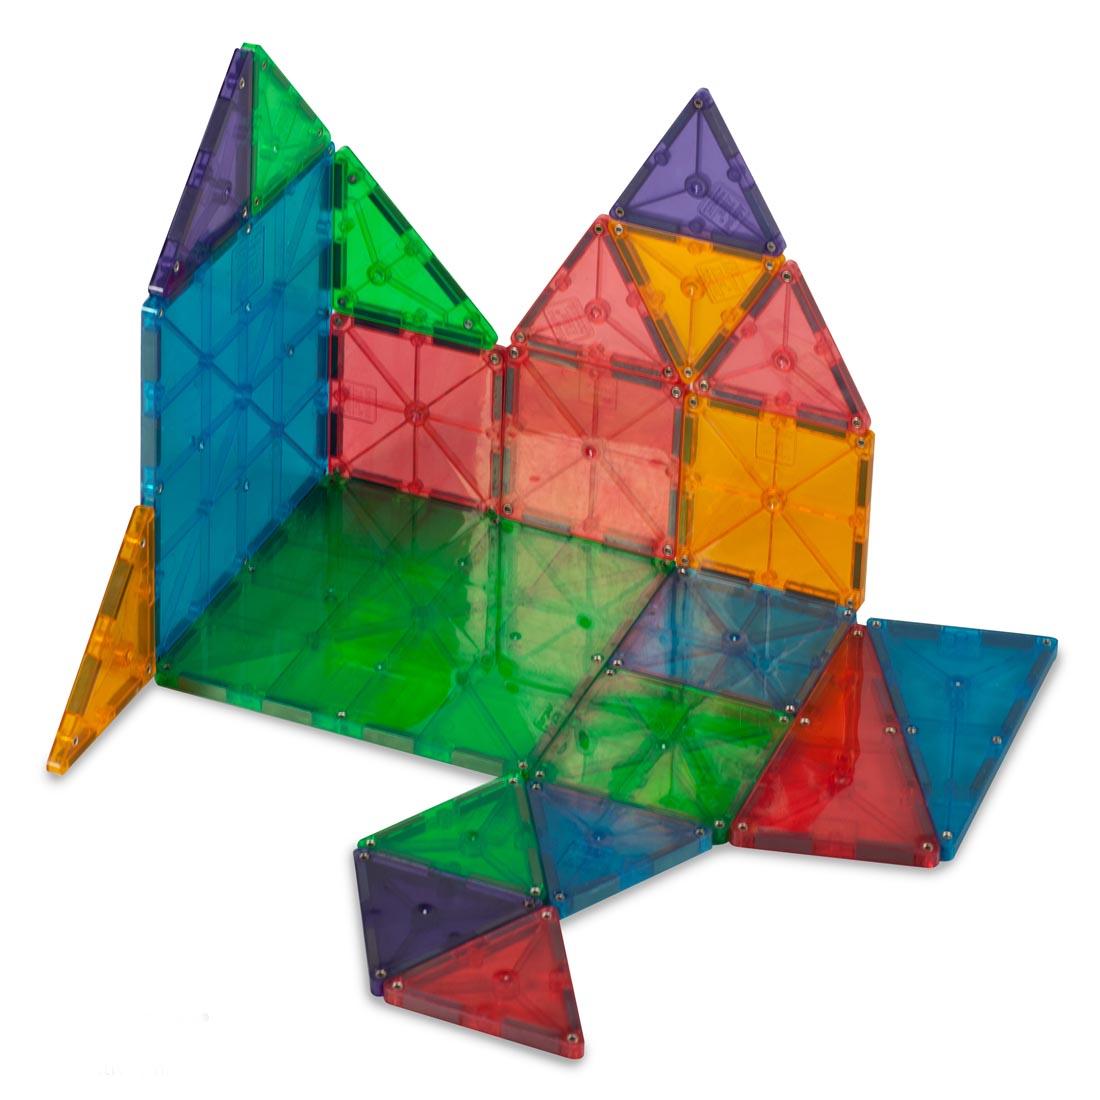 A structure made with the Magna-Tiles Clear Colors 32-Count Set